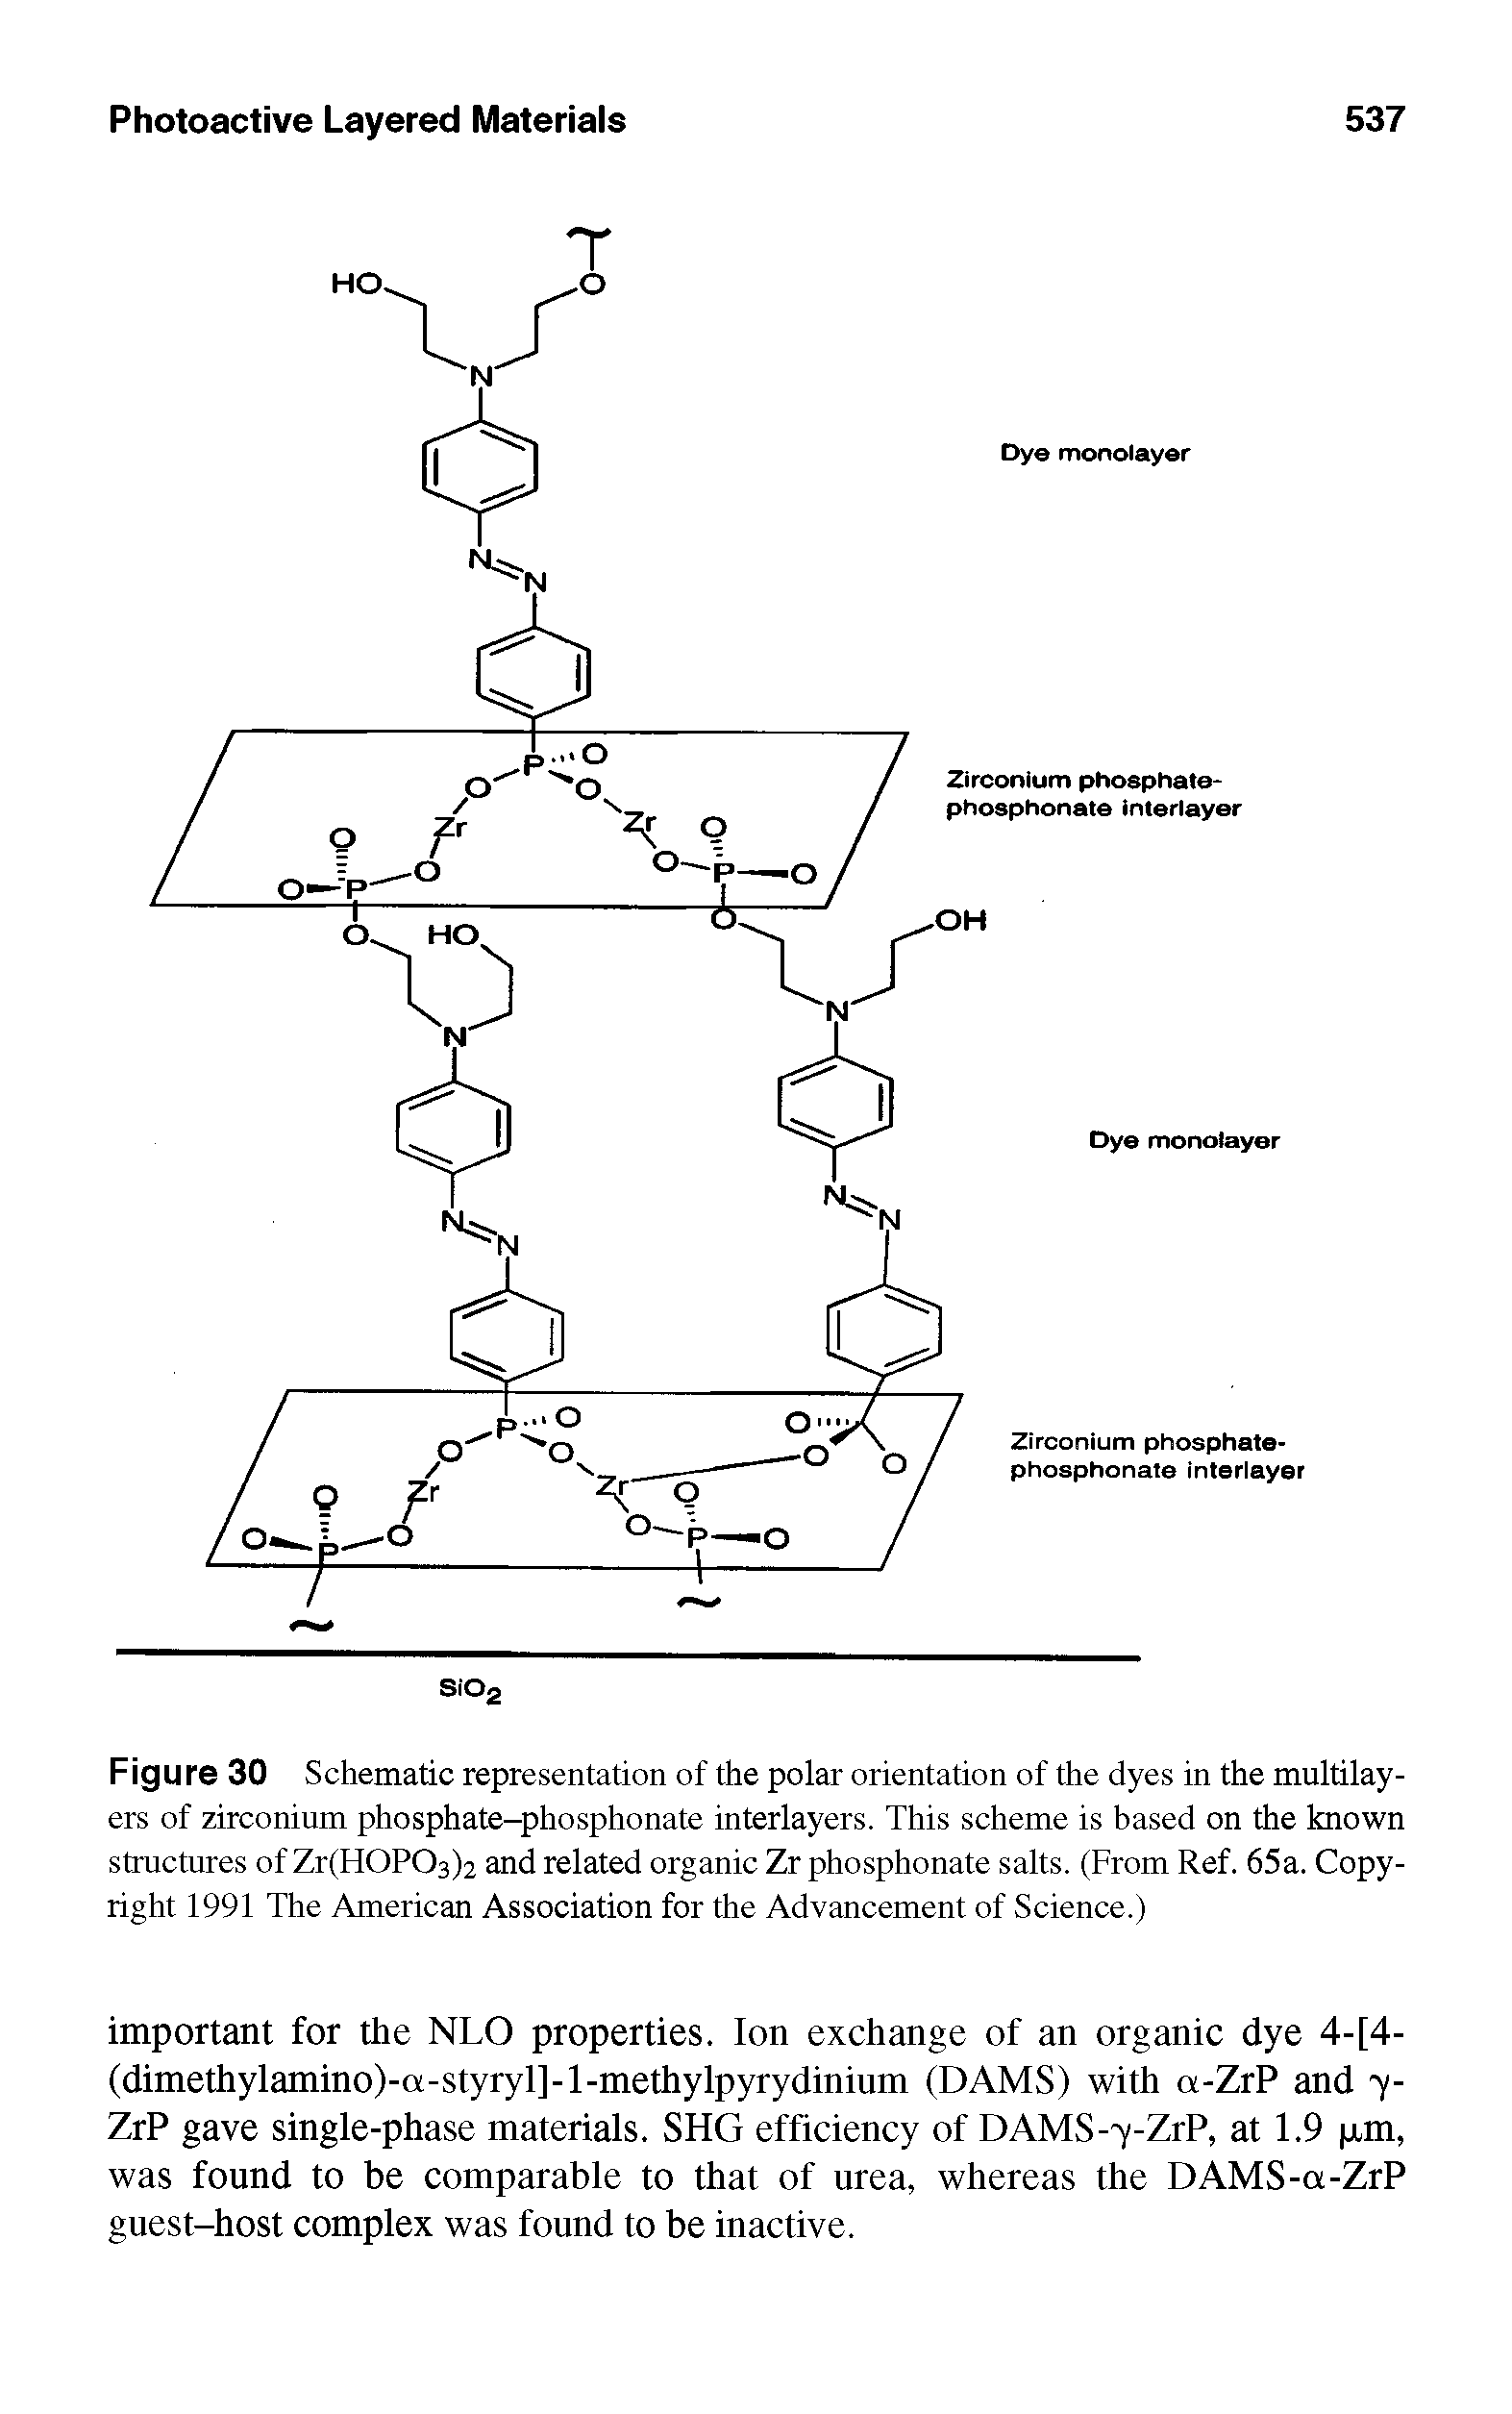 Figure 30 Schematic representation of the polar orientation of the dyes in the multilayers of zirconium phosphate-phosphonate interlayers. This scheme is based on the known structures of Zr(H0P03)2 and related organic Zr phosphonate salts. (From Ref. 65a. Copyright 1991 The American Association for the Advancement of Science.)...